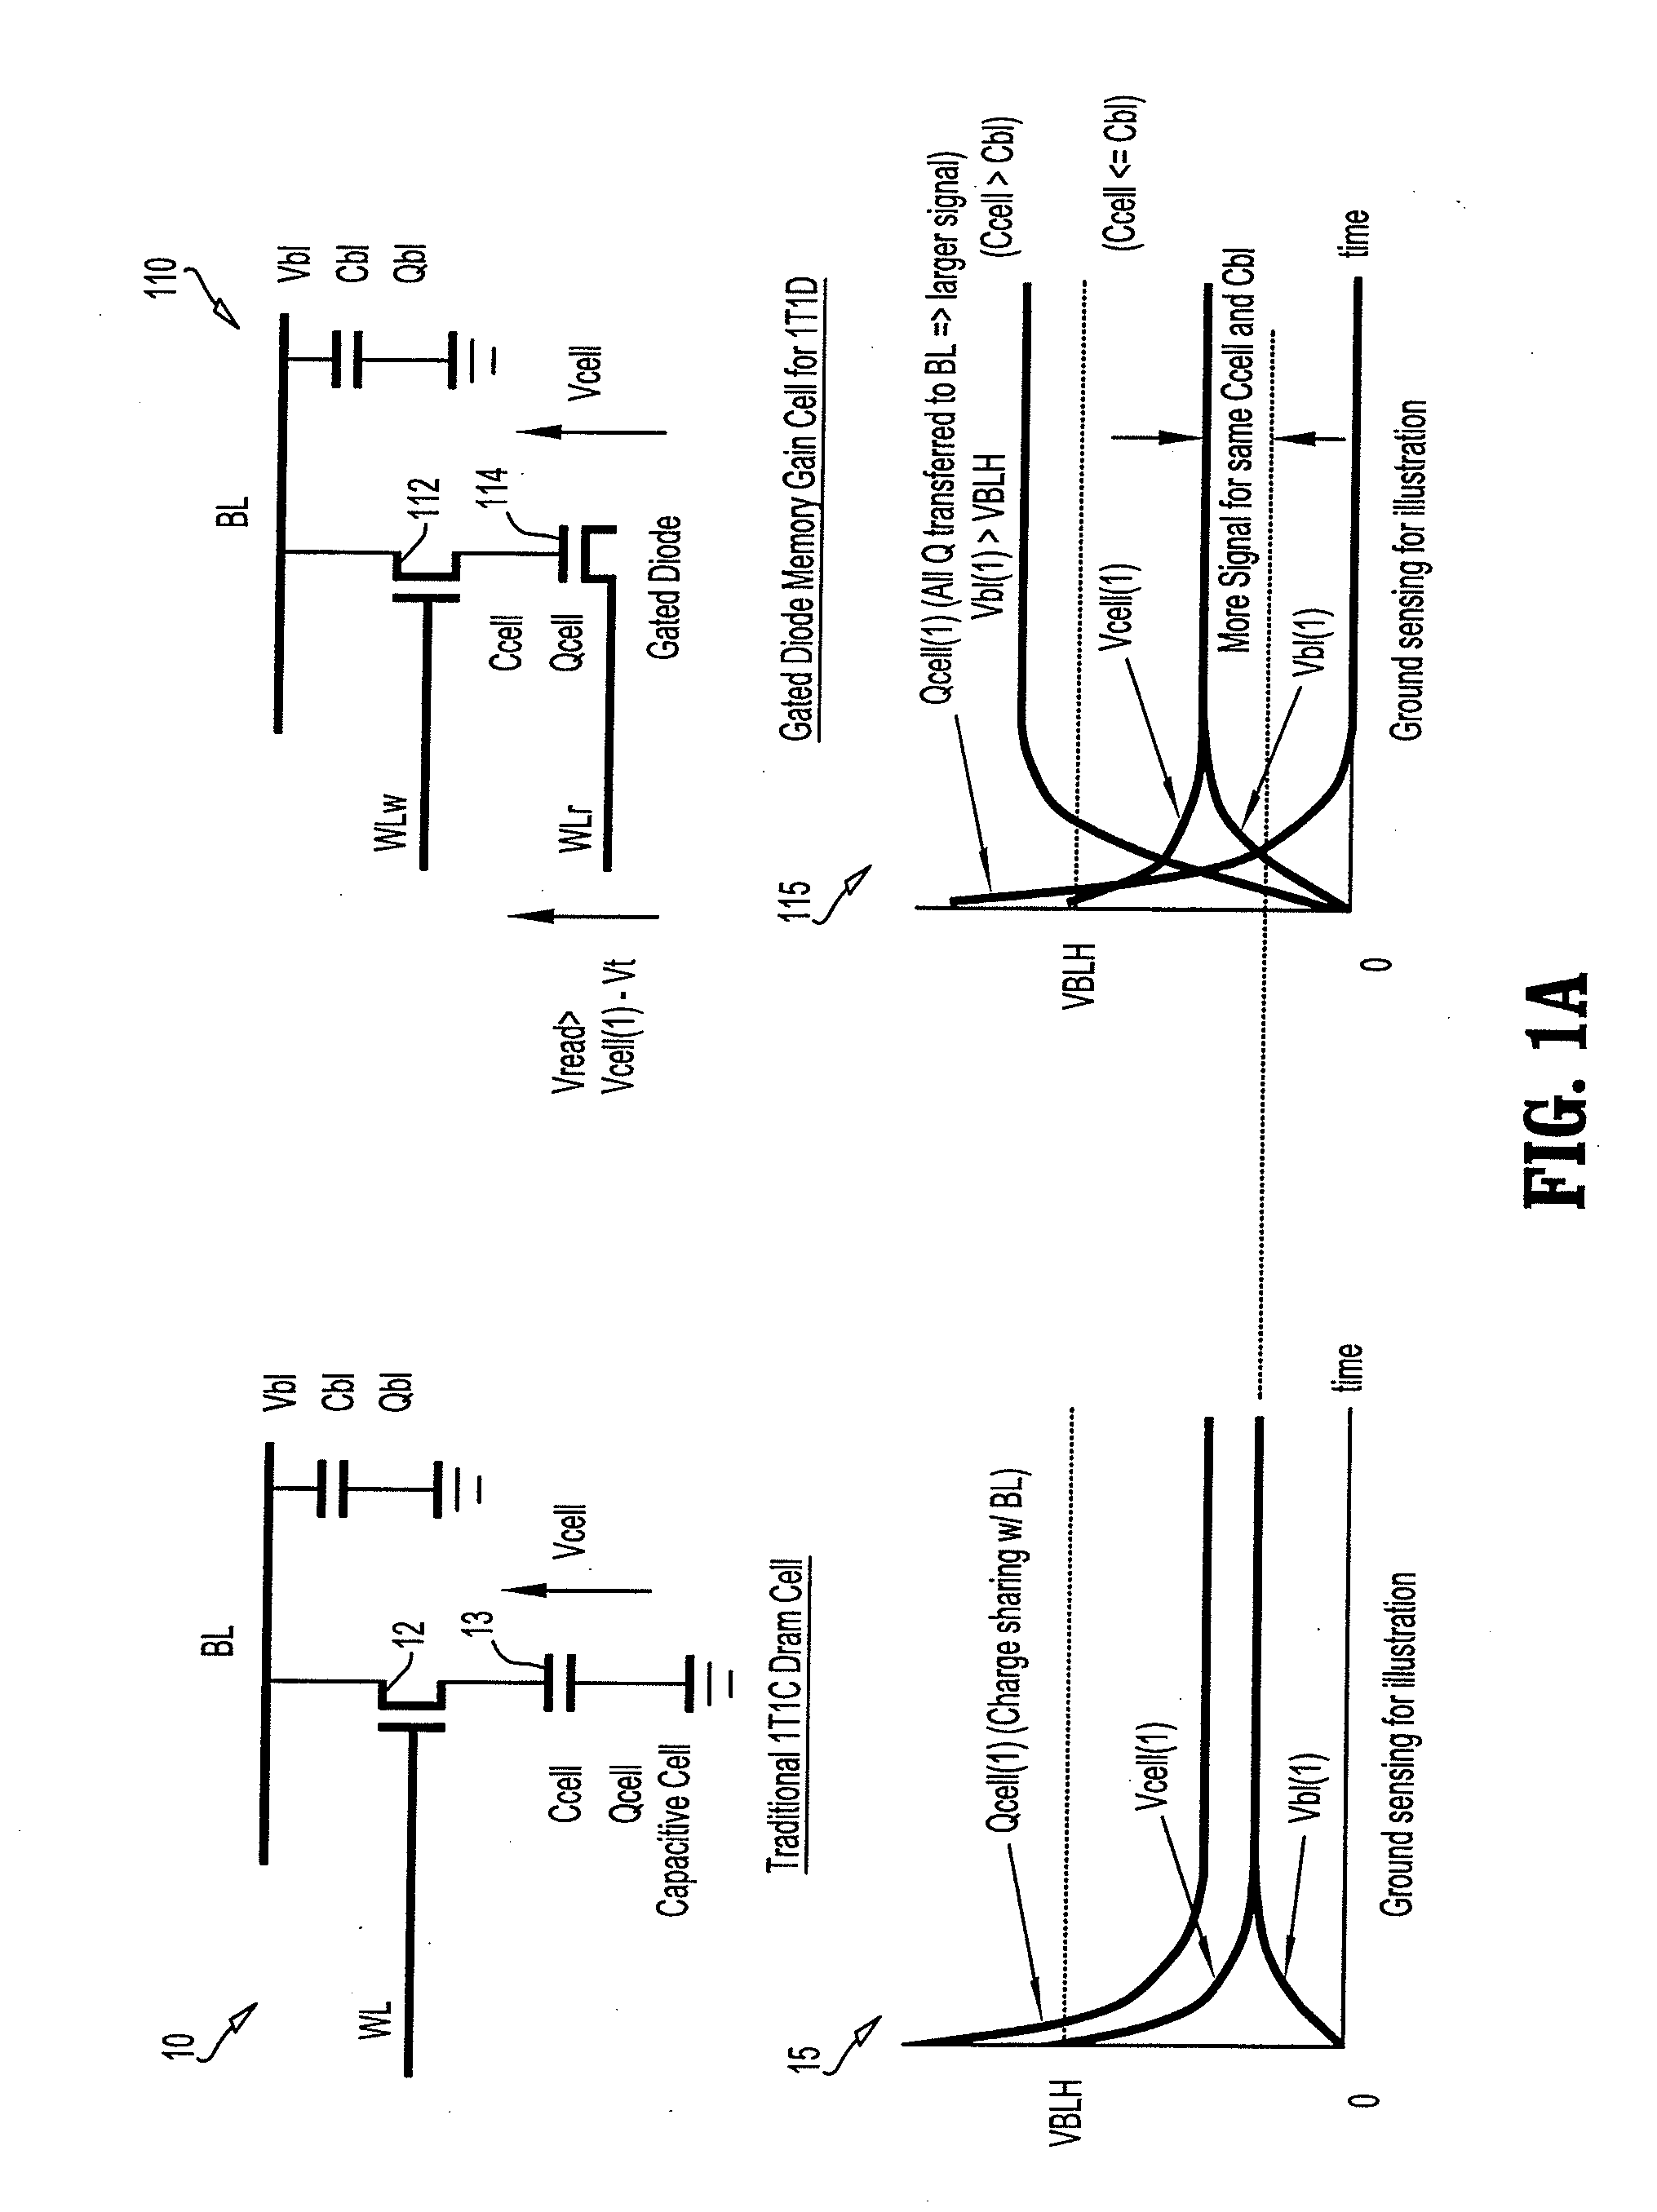 Gated Diode Memory Cells